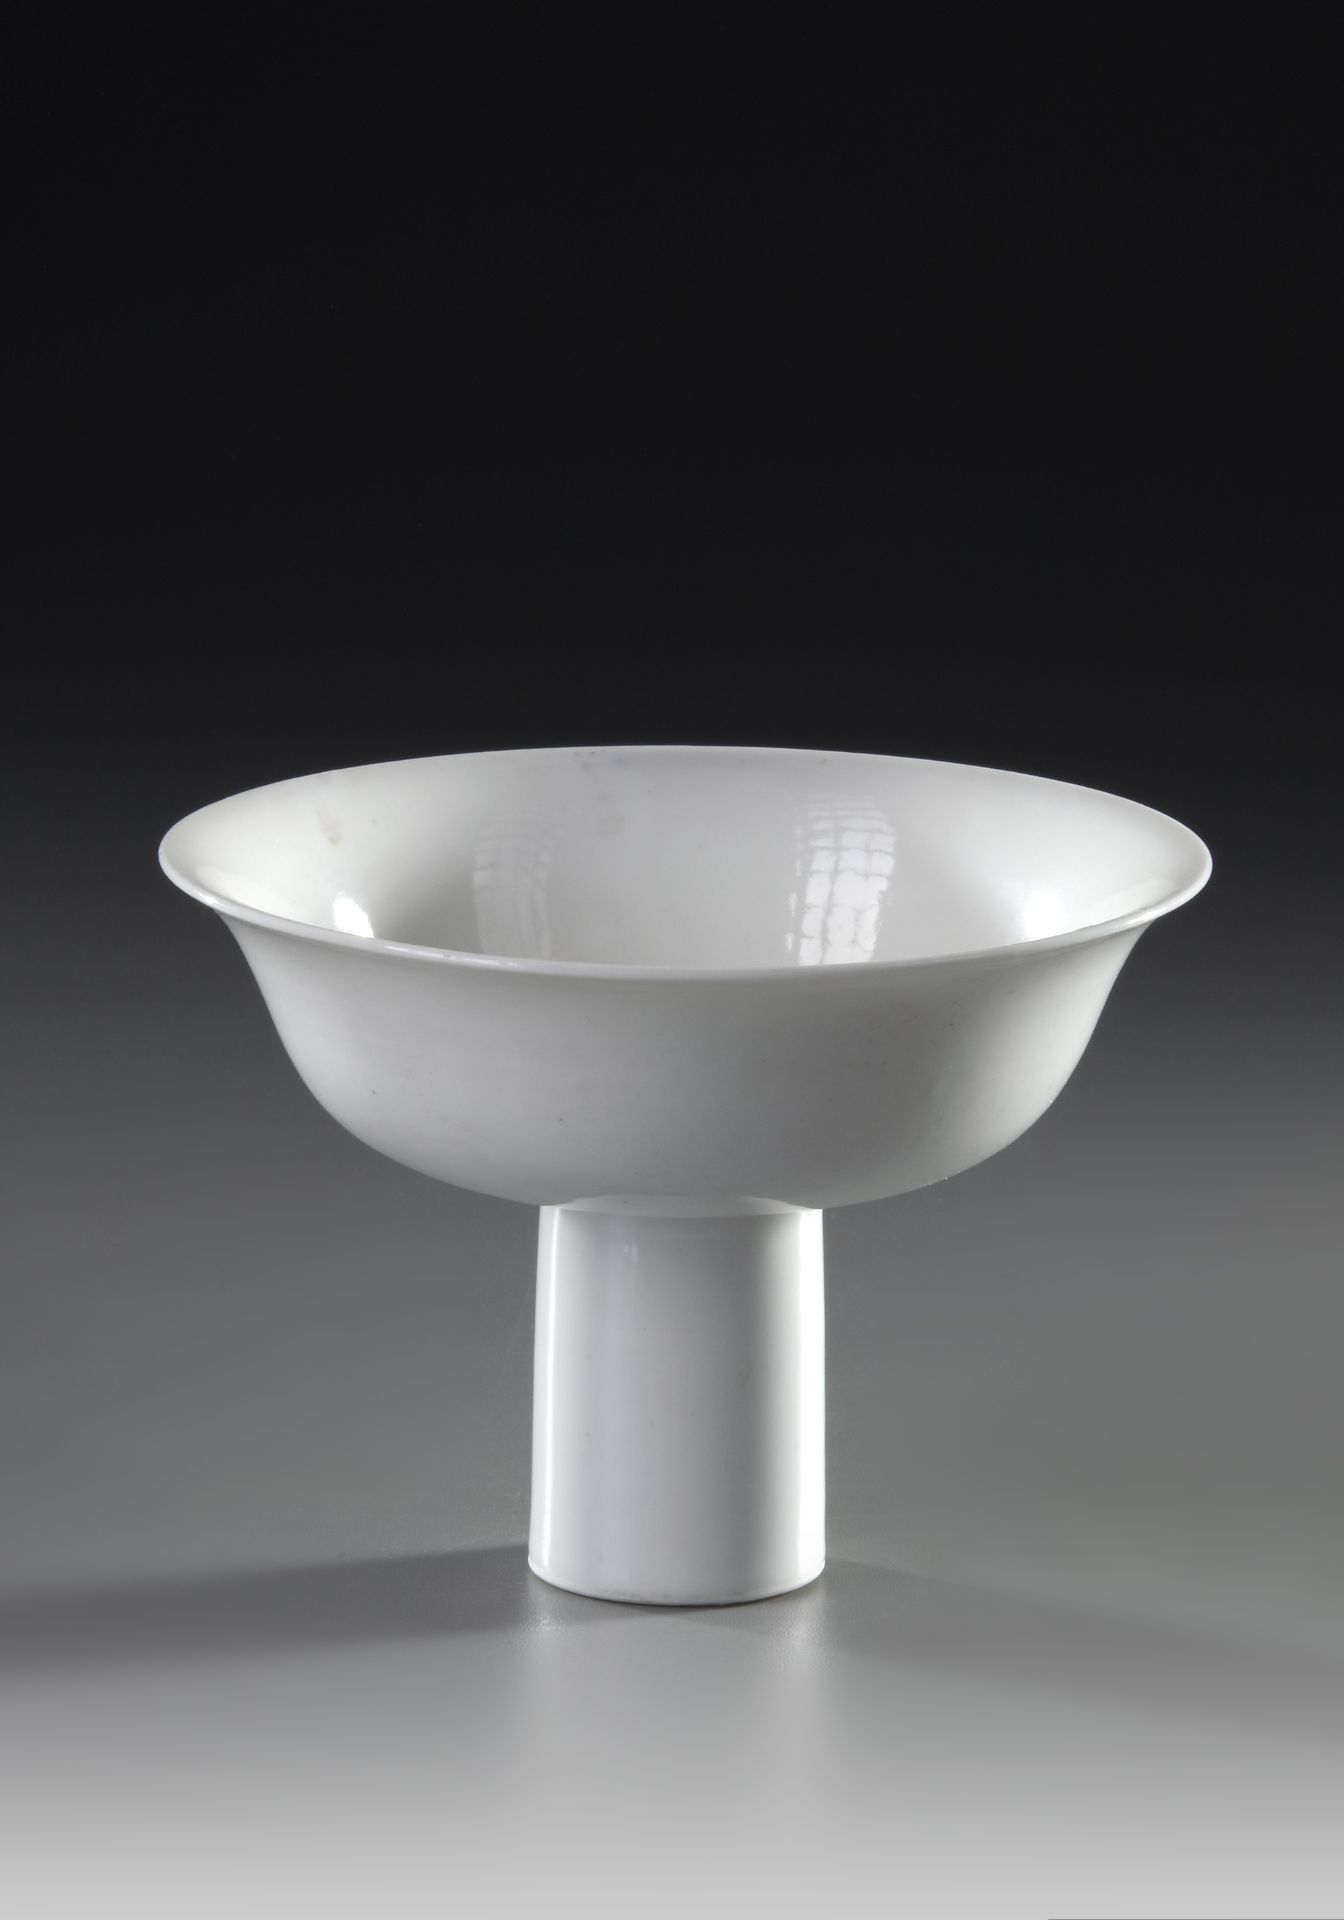 A CHINESE BLANC DE CHINE STEM BOWL, LATE MING DYNASTY (17TH CENTURY) - Image 2 of 4